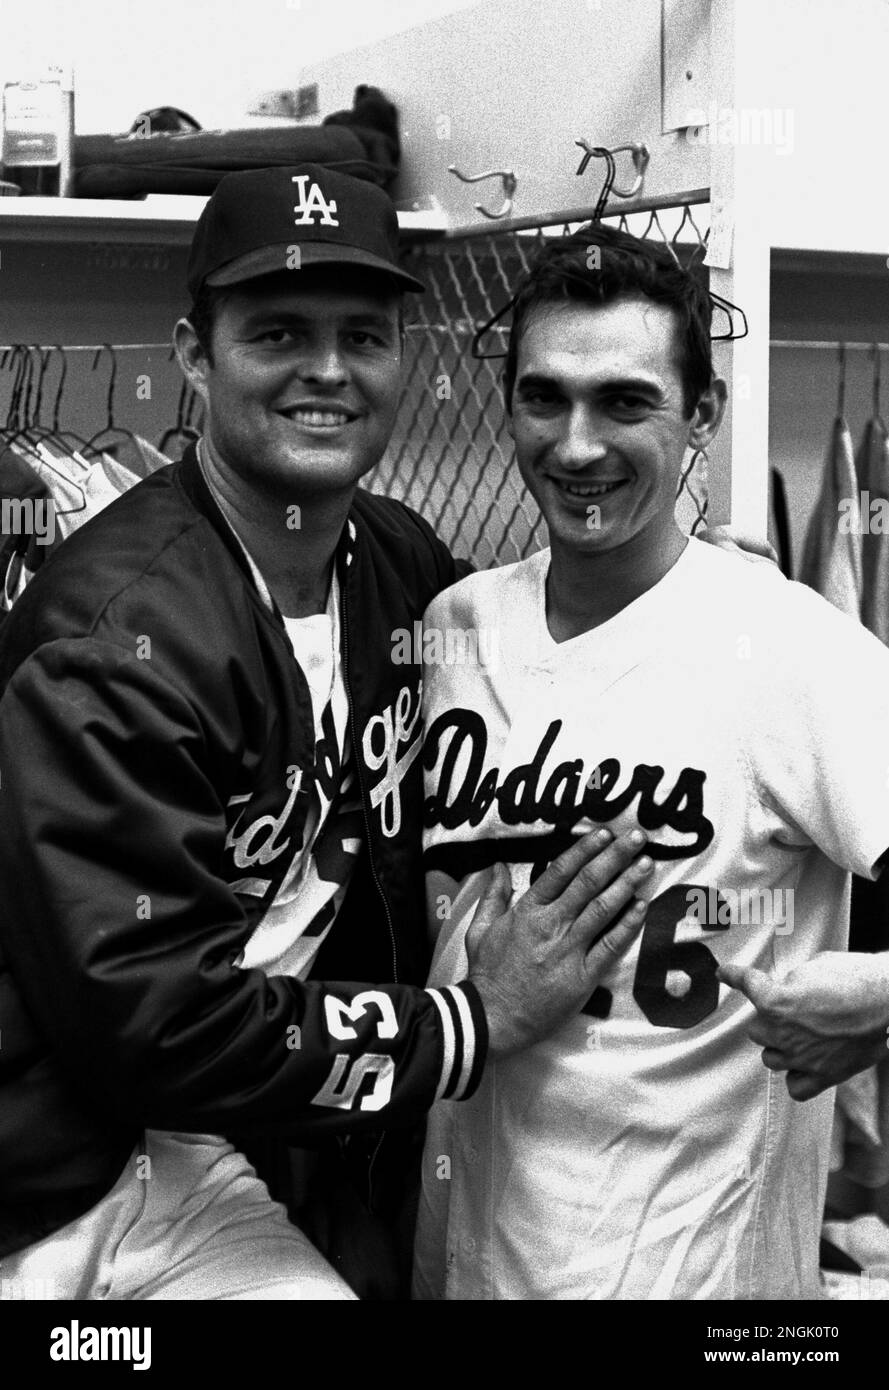 Los Angeles Dodgers' pitcher Don Drysdale with infielder Paul Popovich,  right, after Drysdale set new major league record by pitching sixth shutout  in a row and National League record of 54 consecutive